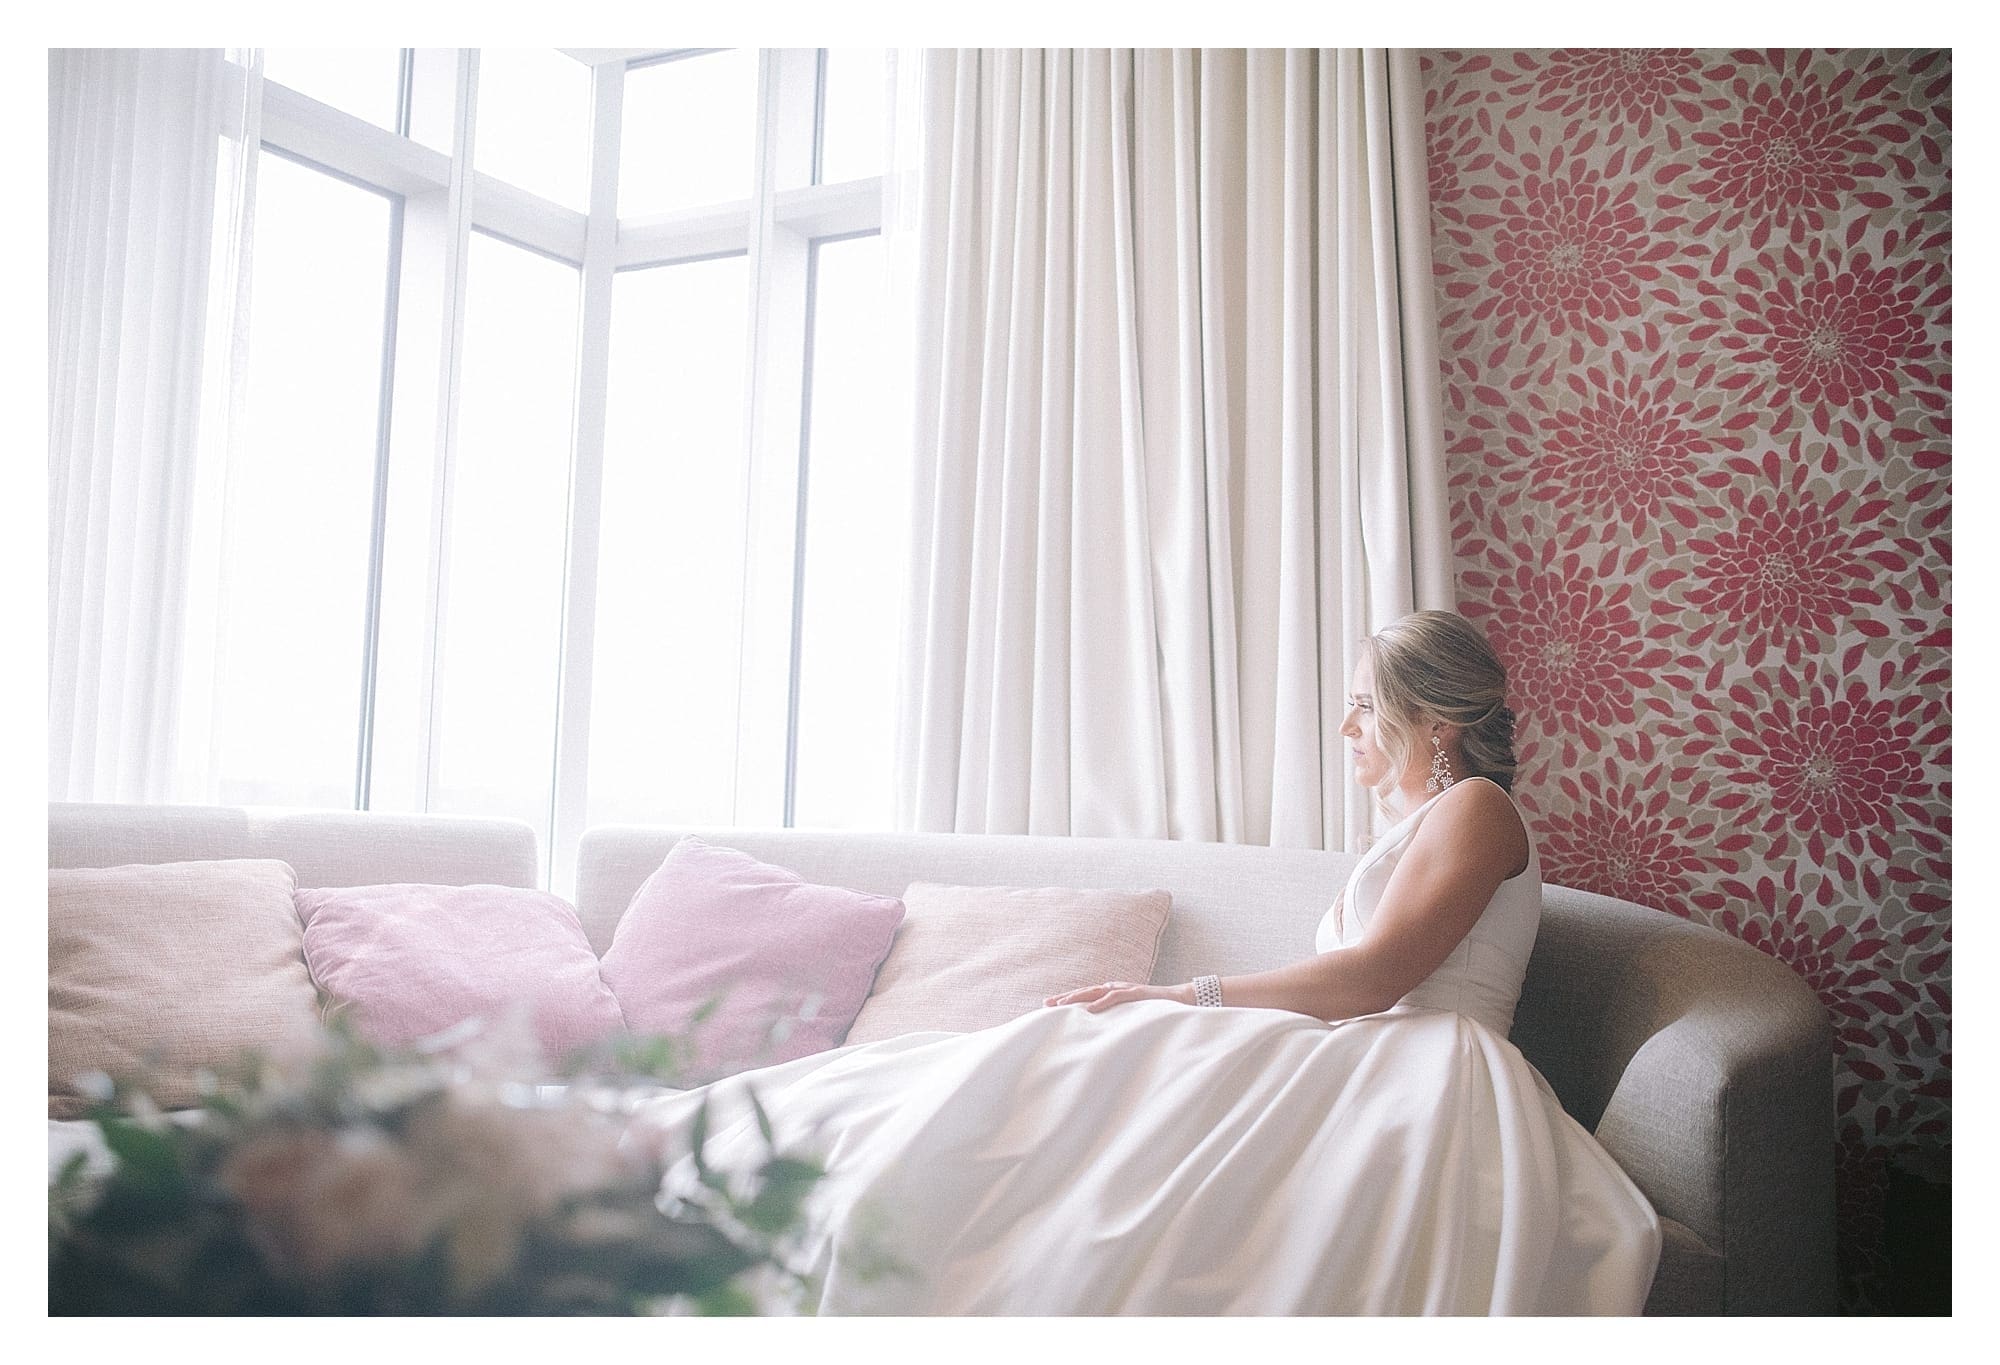 Bride in wedding dress sitting on couch looking out large window